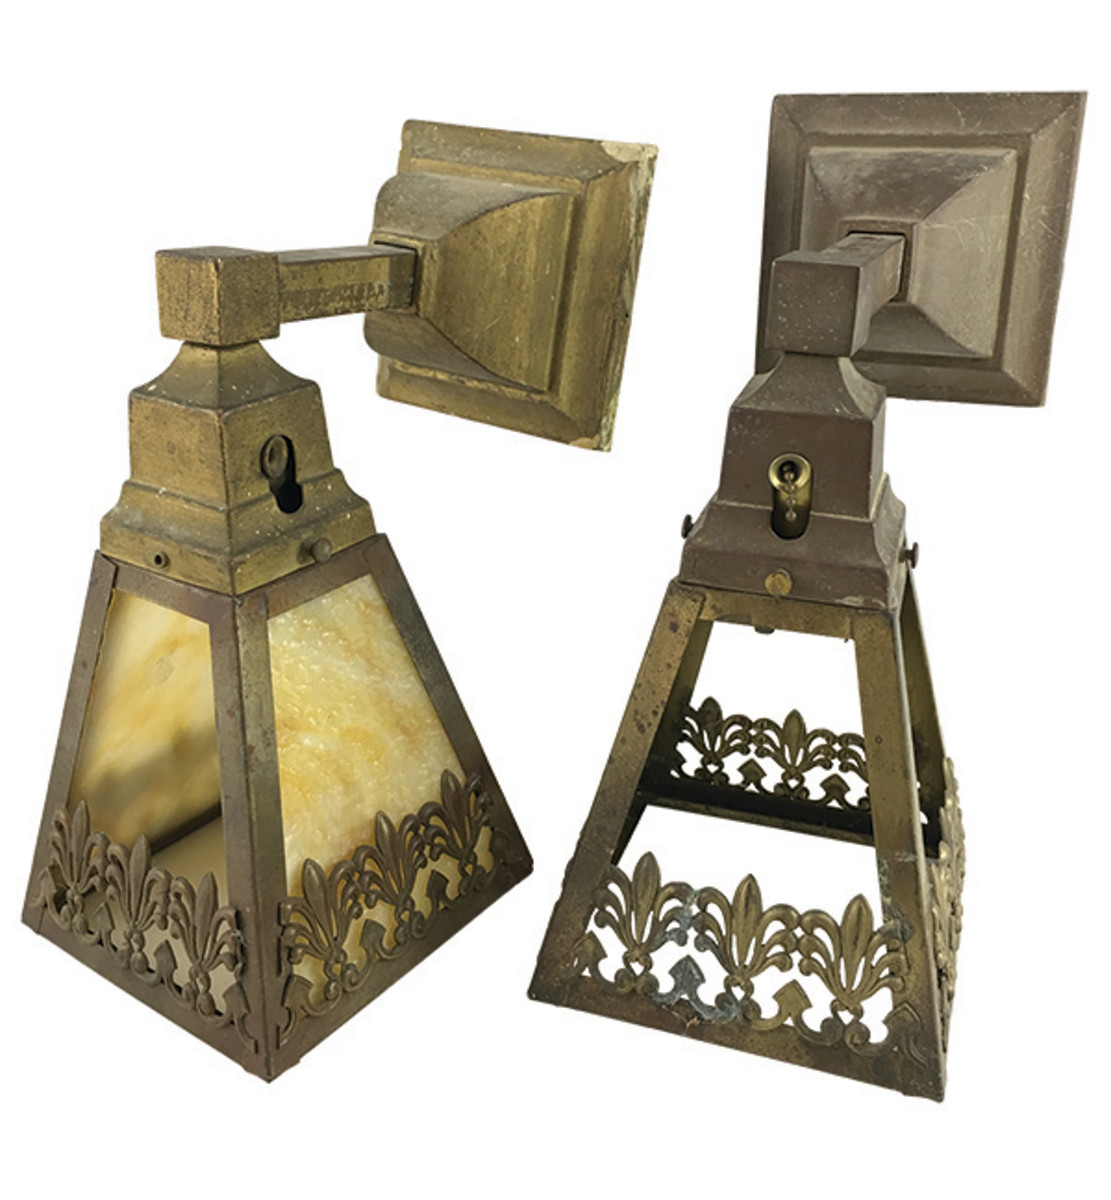 Early 20th-century sconces, before restoration.